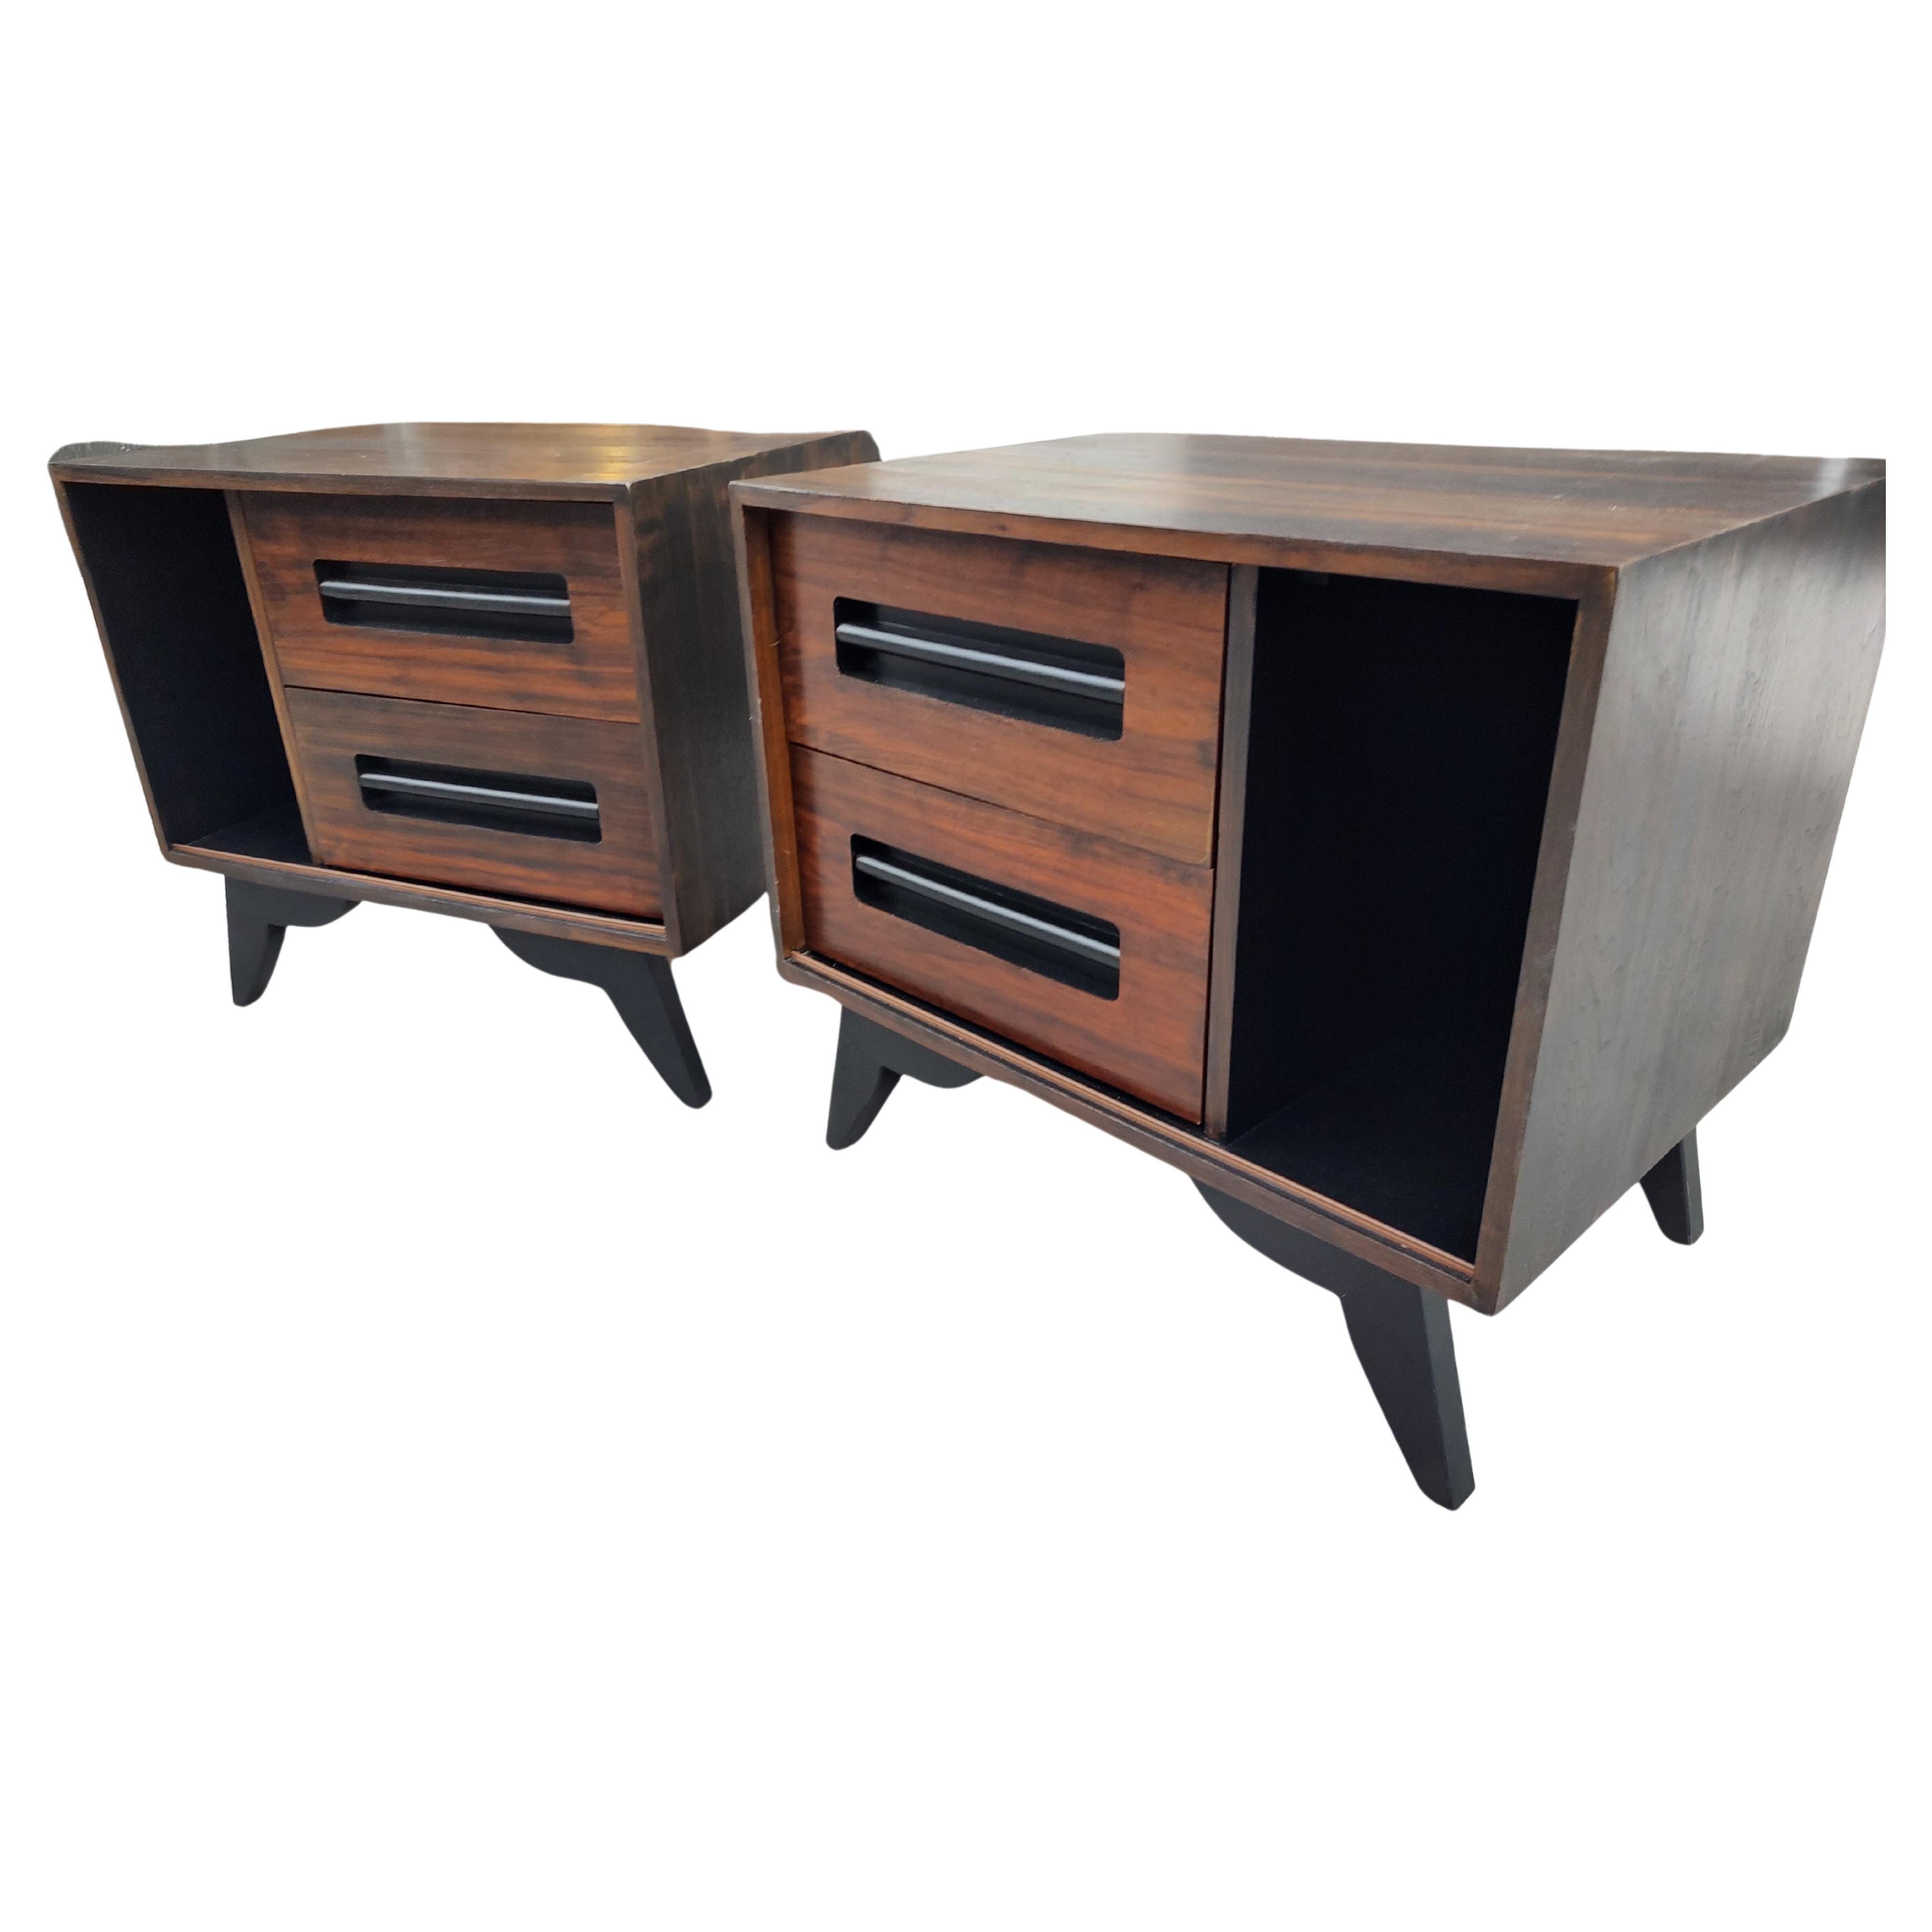 Pair of Mid-Century Modern Danish Rosewood & Black Lacquer Nightstands C1970 In Good Condition For Sale In Port Jervis, NY